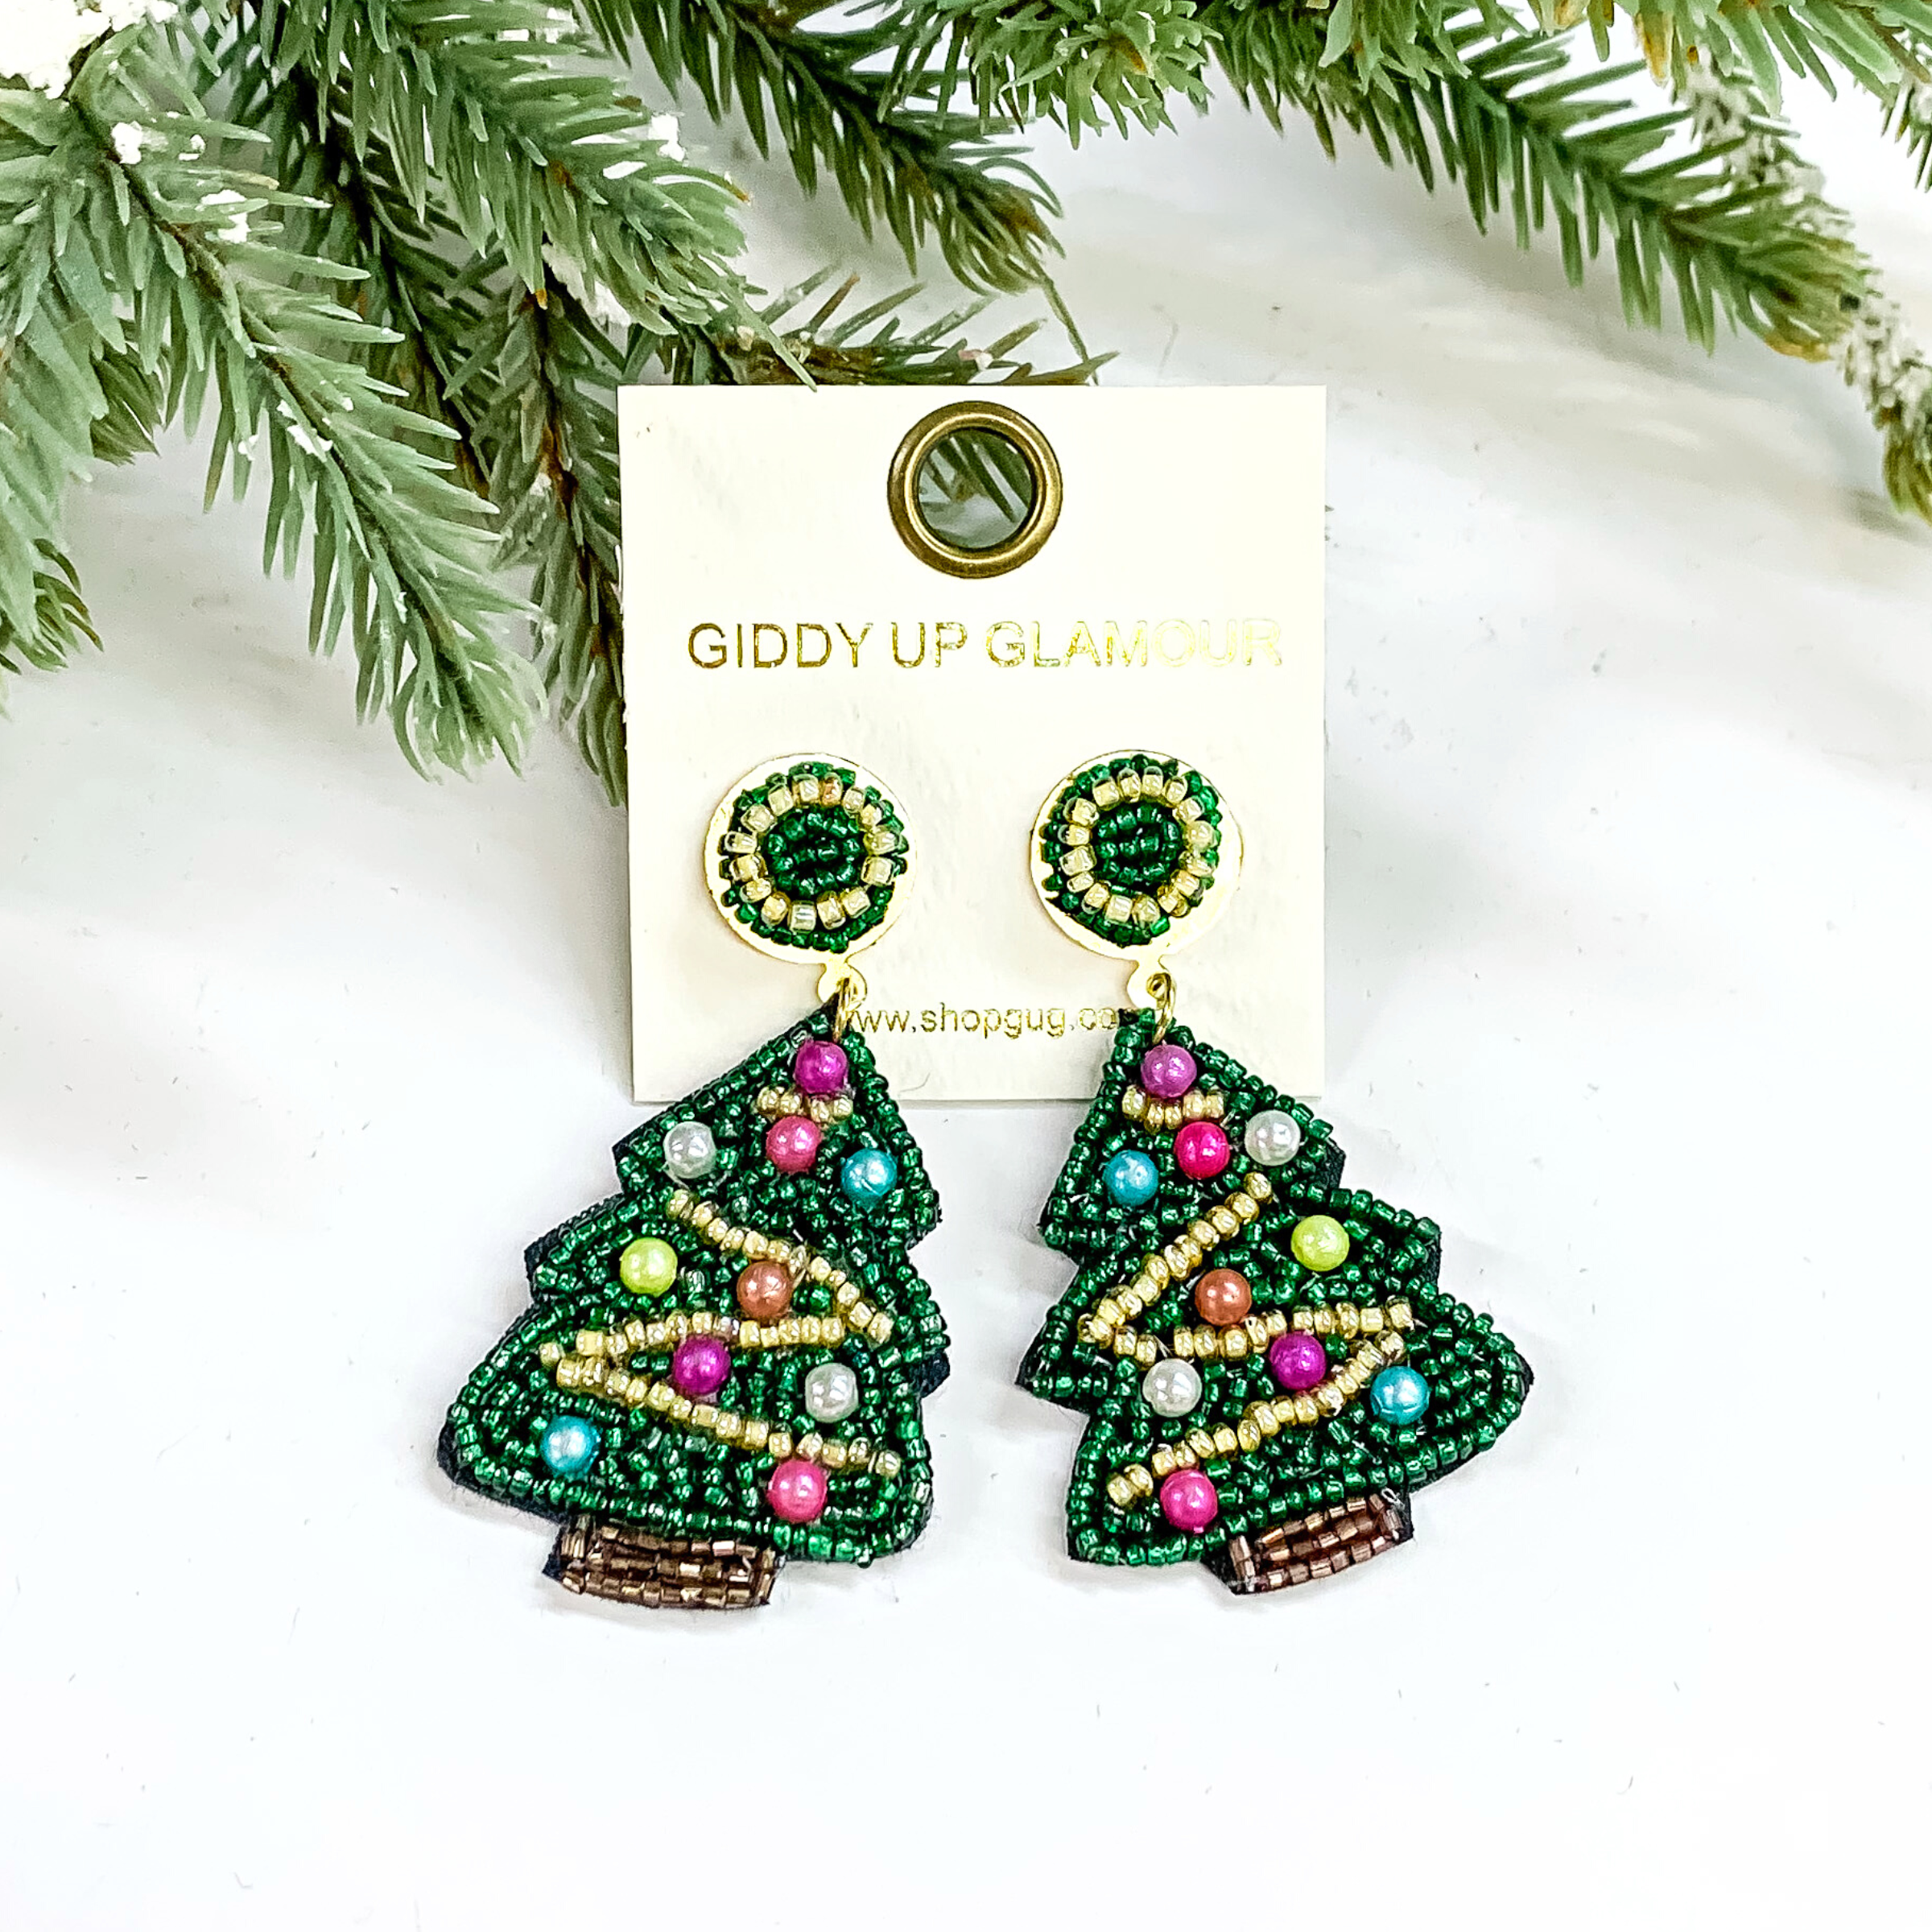 These are beaded Christmas tree earrings in green, gold, brown and multicolor pearl ornaments. There is champagne/gold beads as the 'ribbon' all around with the tree with pearl ornaments in purple,pink, teal silver, and rose gold. These earrings are taken on a white background with a tree in the back as decor.